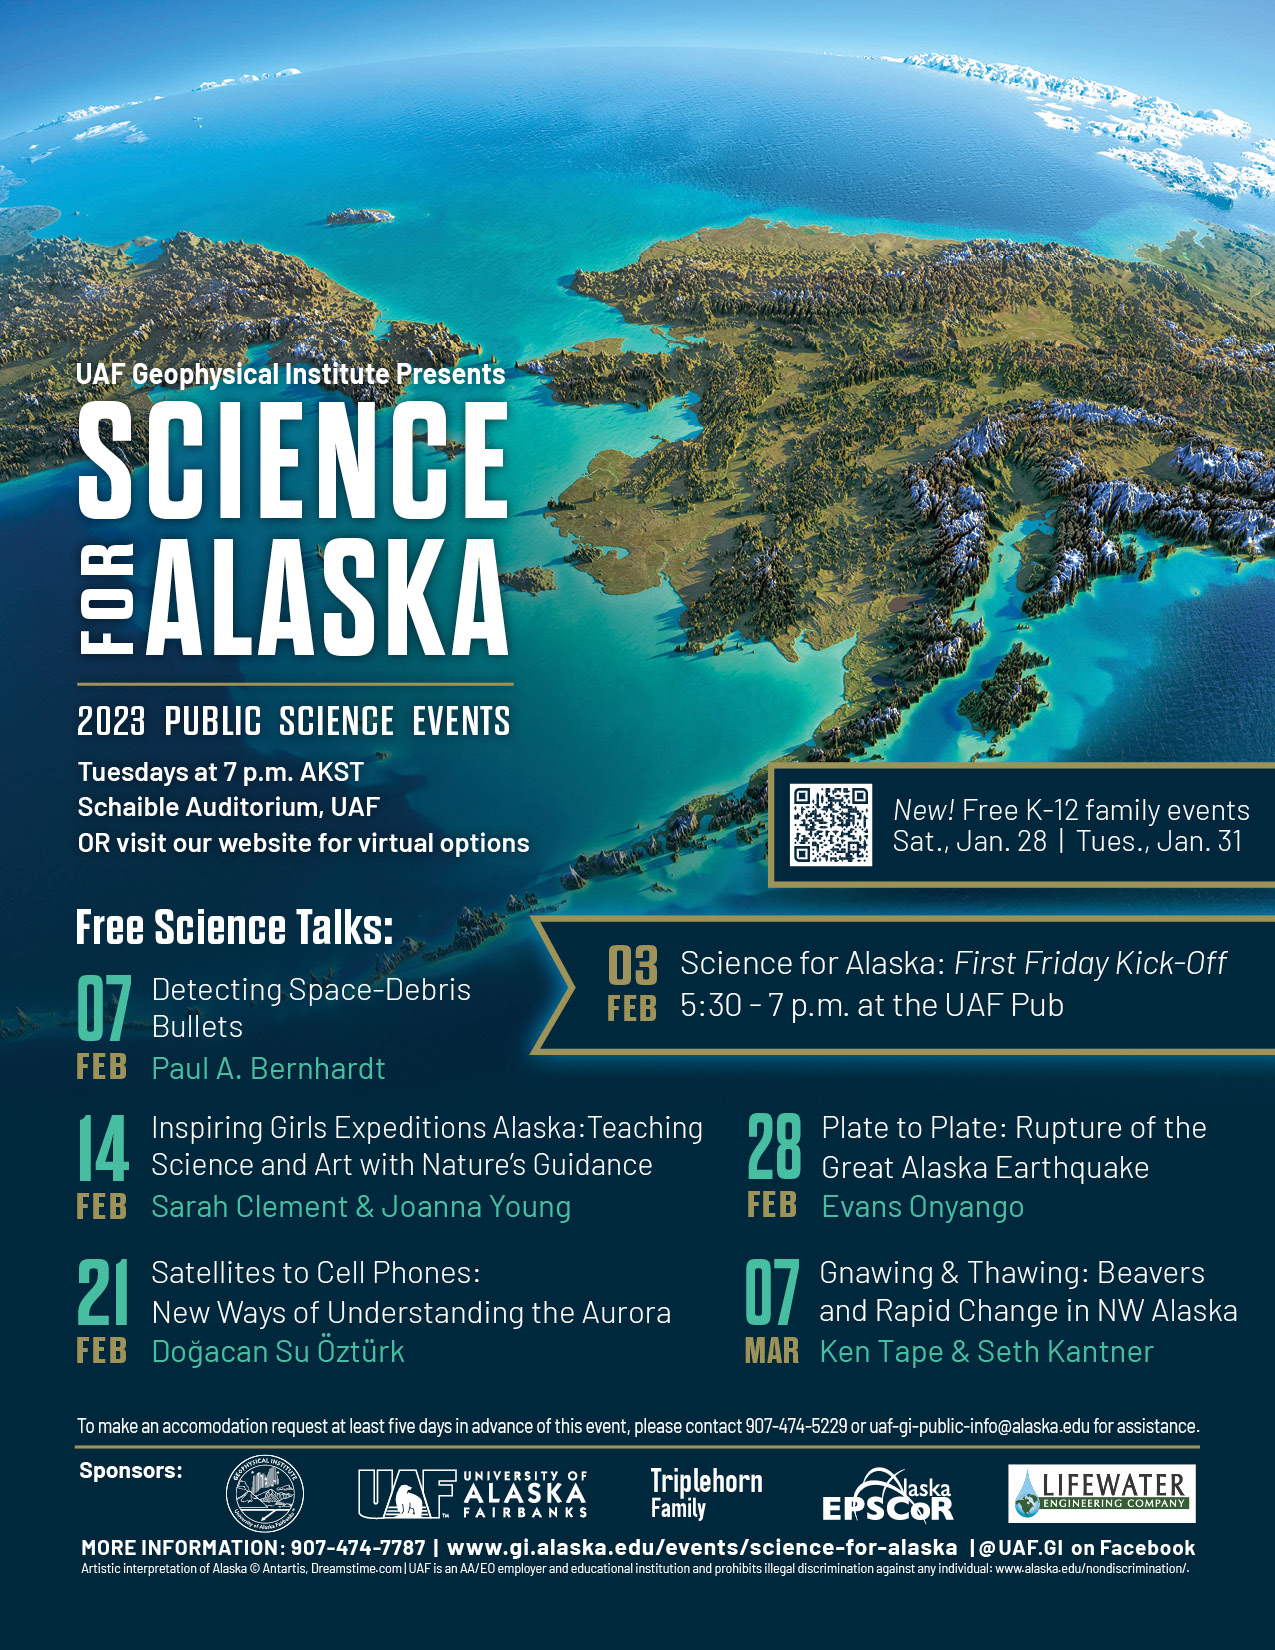 Lineup of Science for Alaska talk series with blue and green picture of Alaska and the ocean. The line up for kick off events includes free k-12 family events on Jun 28 and Wed 31. Visit website for more info. Also, Feb 3 Science for Alaska Frirst Friday Kick-off event at the Pub from 5:30-7. The lineup for 7 PM talks is Feb 7 Detecting Space-Debris Bullets by Paul A. Bernhardt, Feb 14 Inspiring Girls Expeditions Alaska: Teaching Science and Art with Nature's Guidance by Sarah Clement and Joanna Young, Feb 21 Satellites to Cell Phones: New Ways of Understanding the Aurora by Dogacan Su Ozturk, Feb 28 Plate to Plate: Rupture of the Great Alaska Earthquake by Evans Onyango, March 7 Gnawing and Thawing: Beavers and Rapid Change in NW Alaska by Ken Tape. To make an accommodation request at least 5 days in advance of this event please contact 907-474-5229.and Seth Kantner..